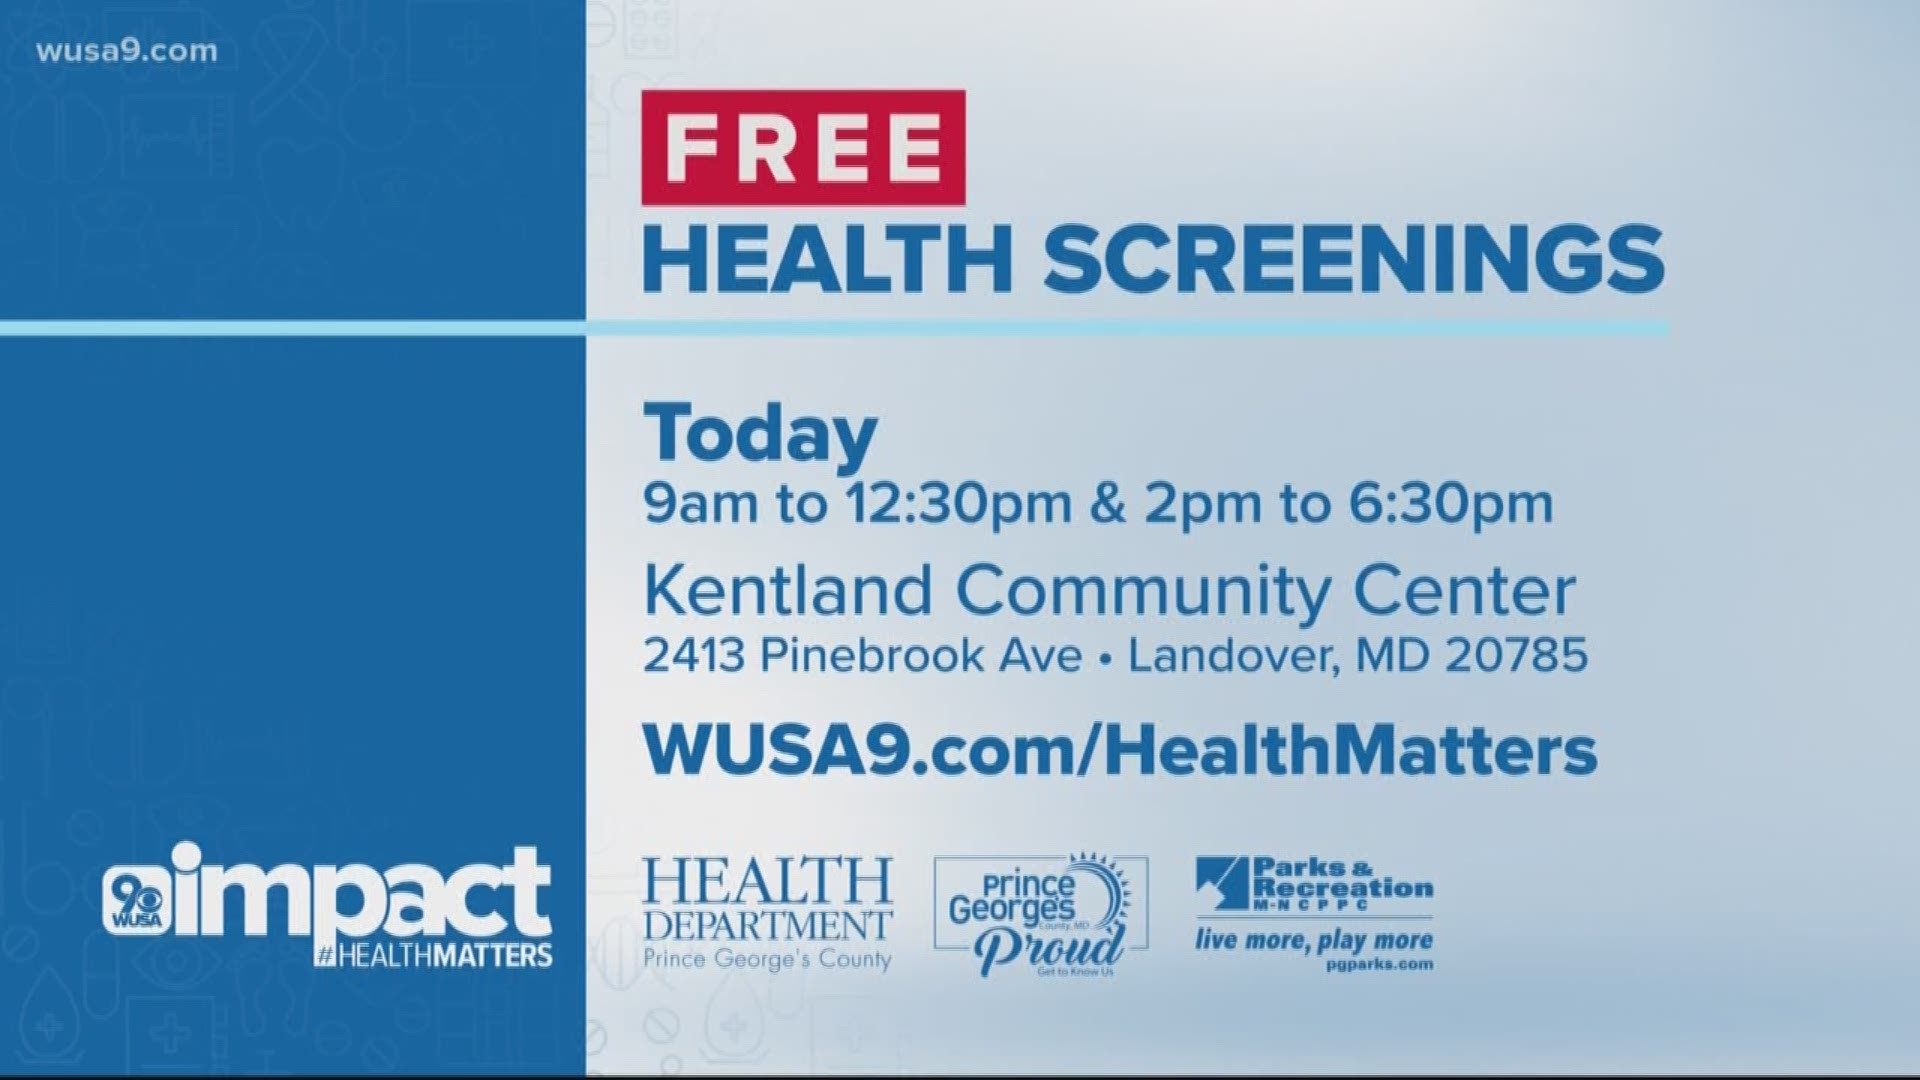 It's time to put your health first. And WUSA9 is here to help!